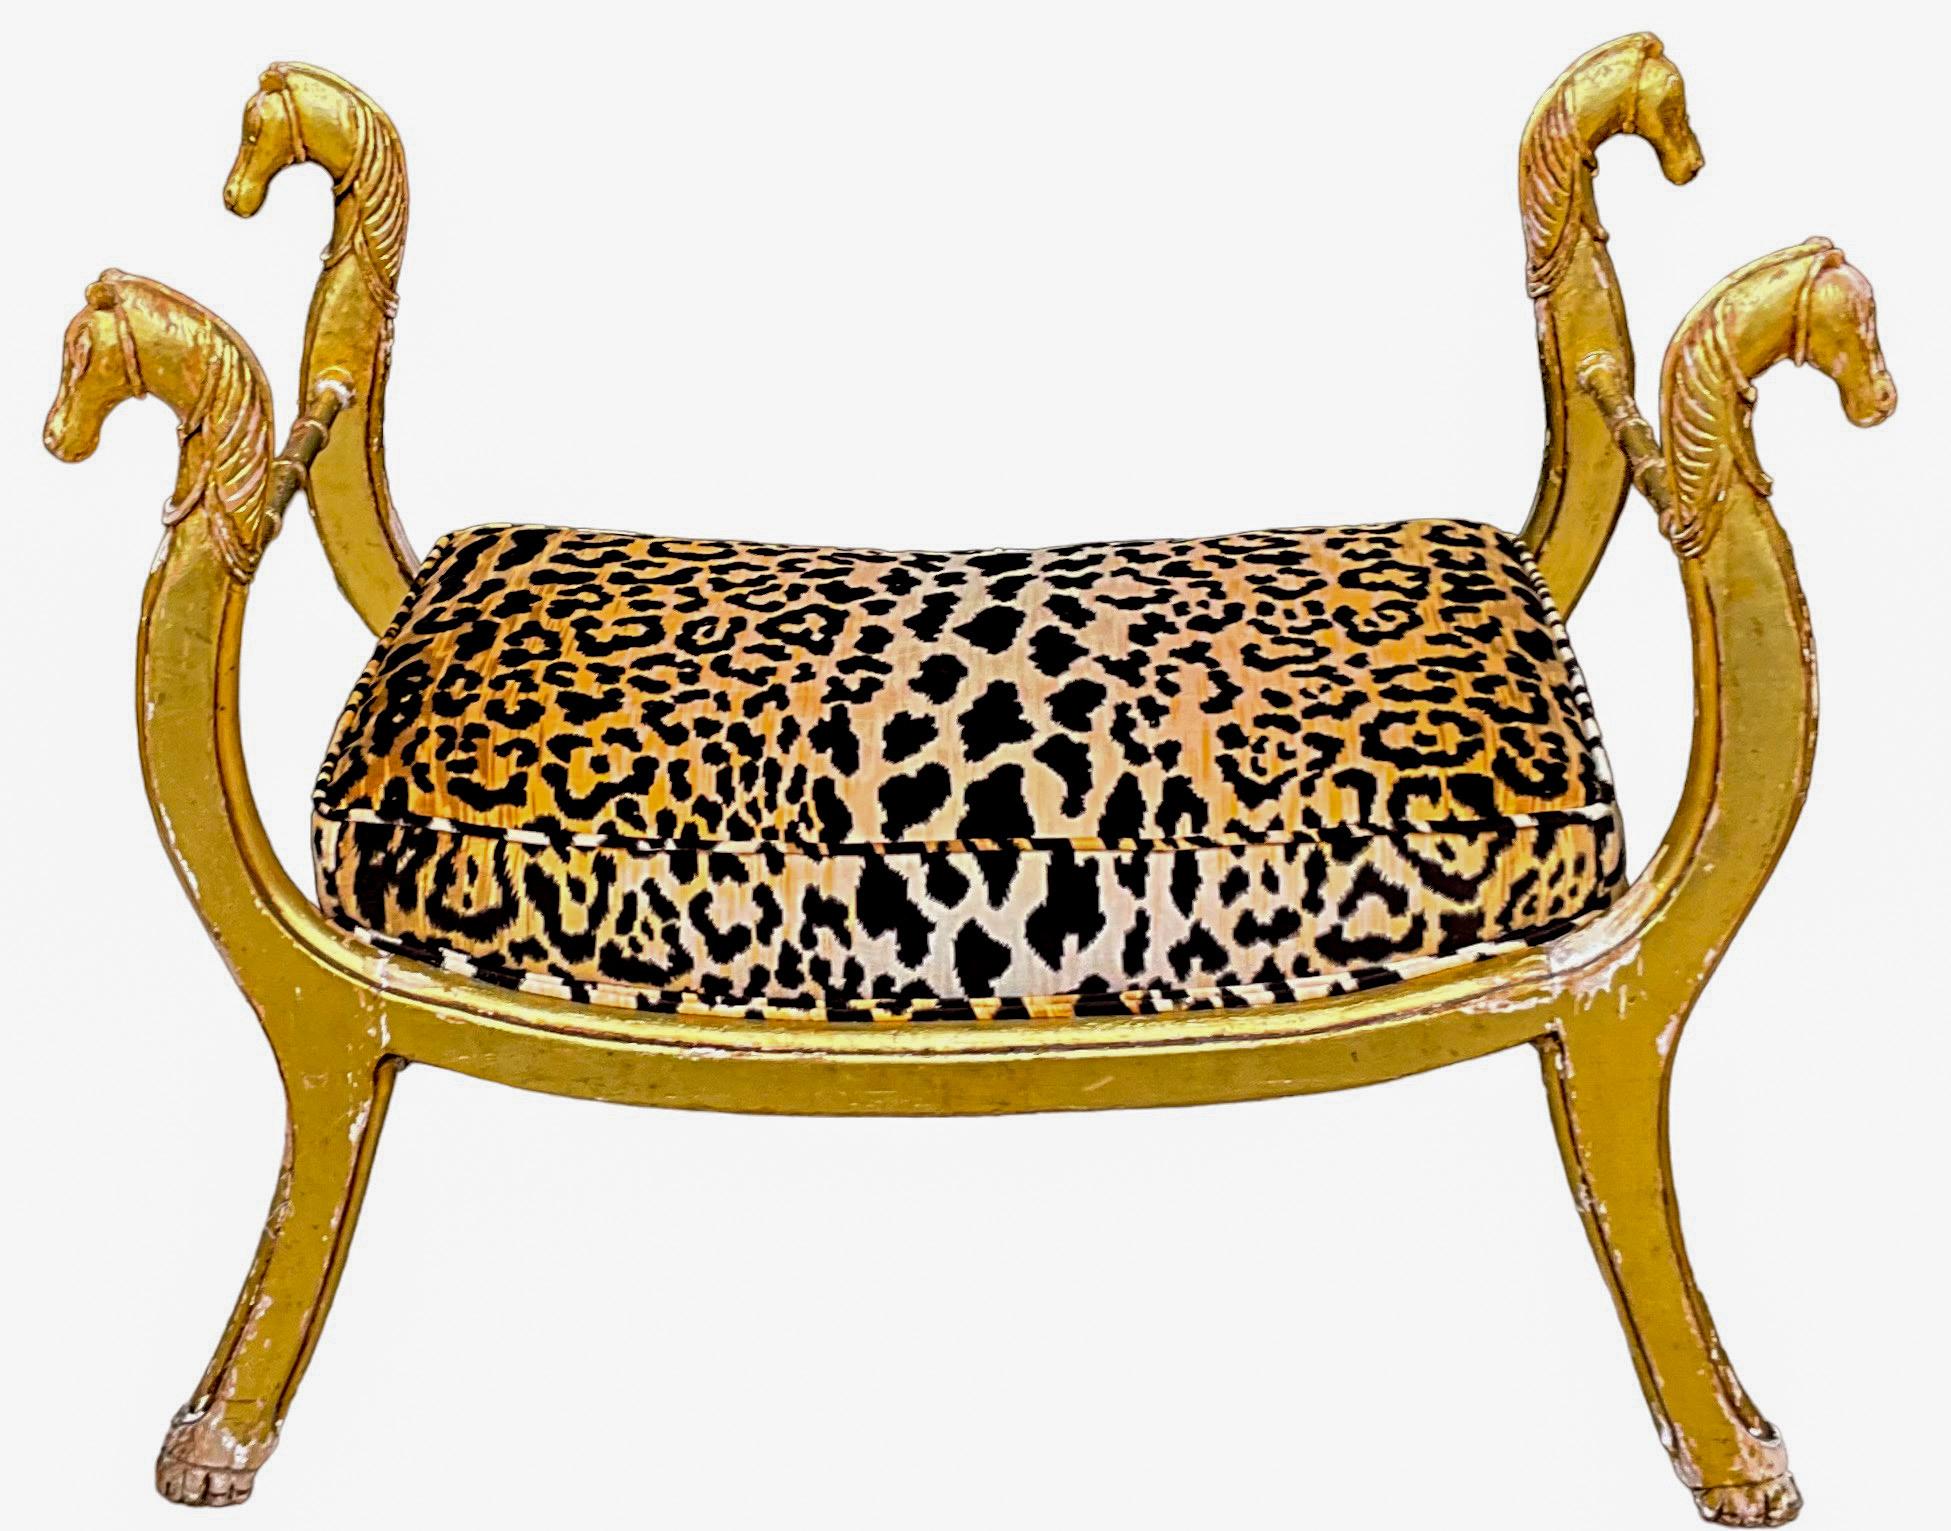 19th-C. Neo-Classical Maison Jansen Style Giltwood Bench In Leopard Velvet  For Sale 1